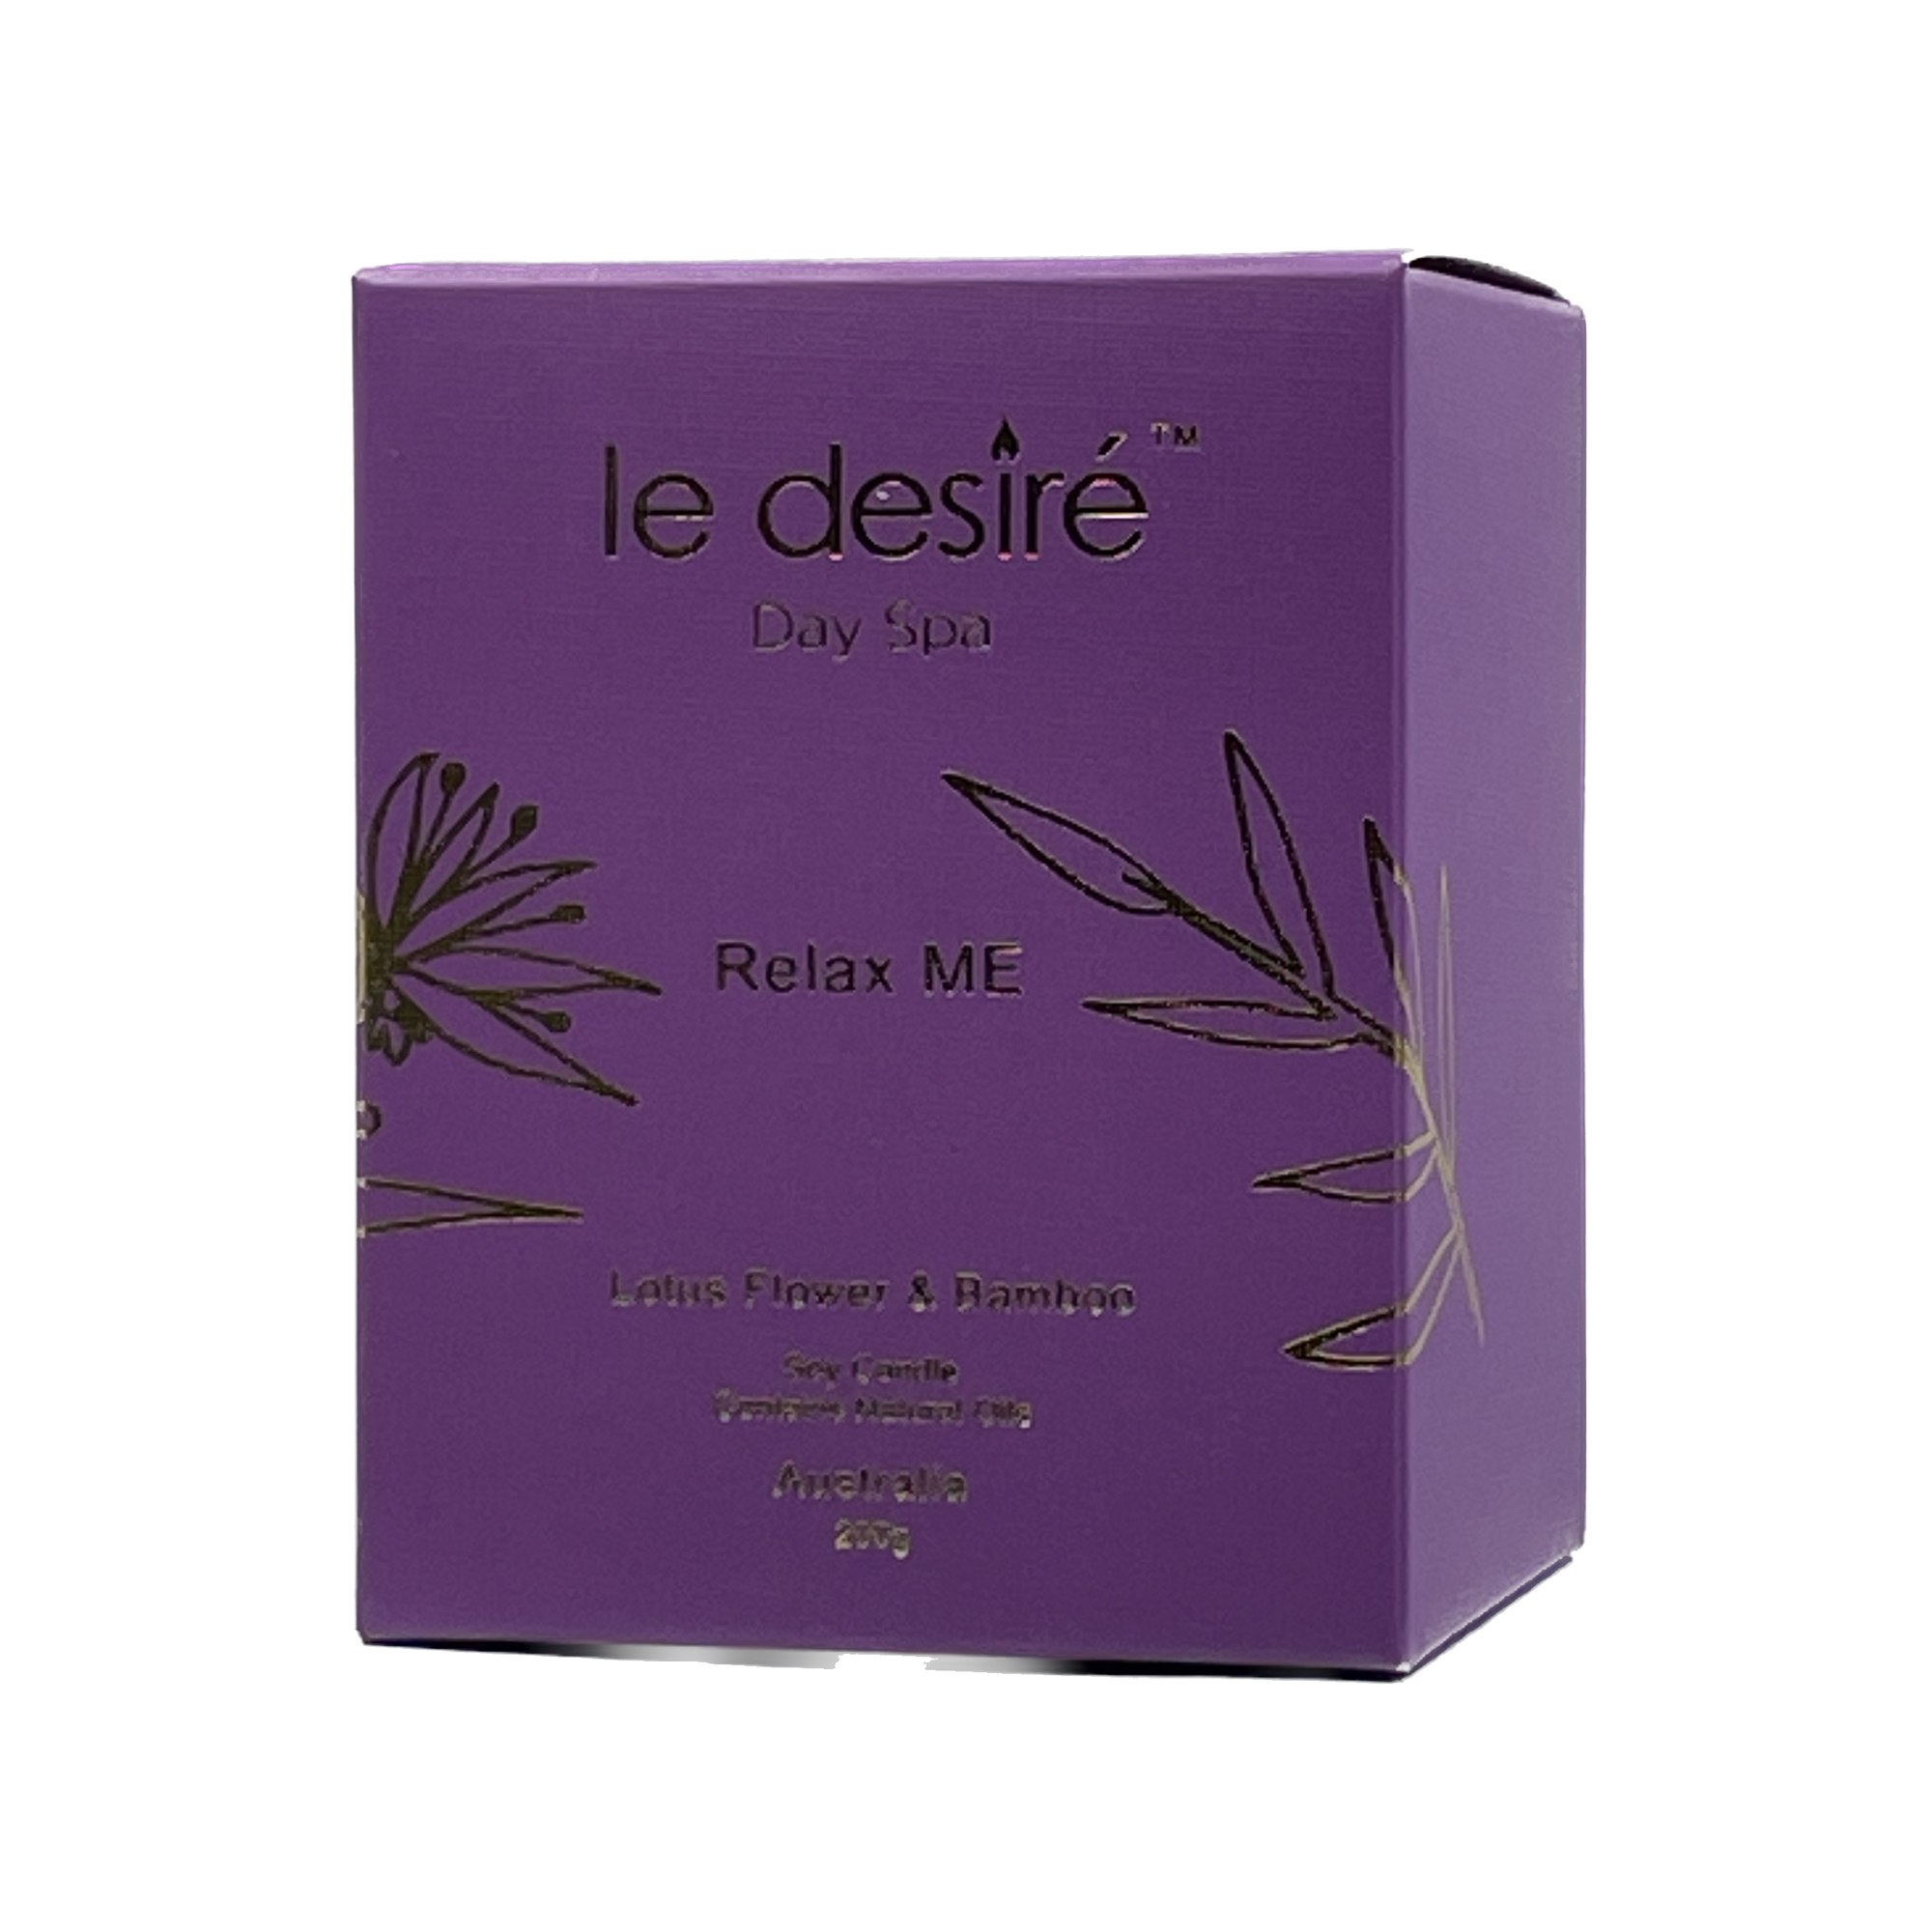 Relax ME (Lotus Flower & Bamboo) - Day Spa Soy Candle